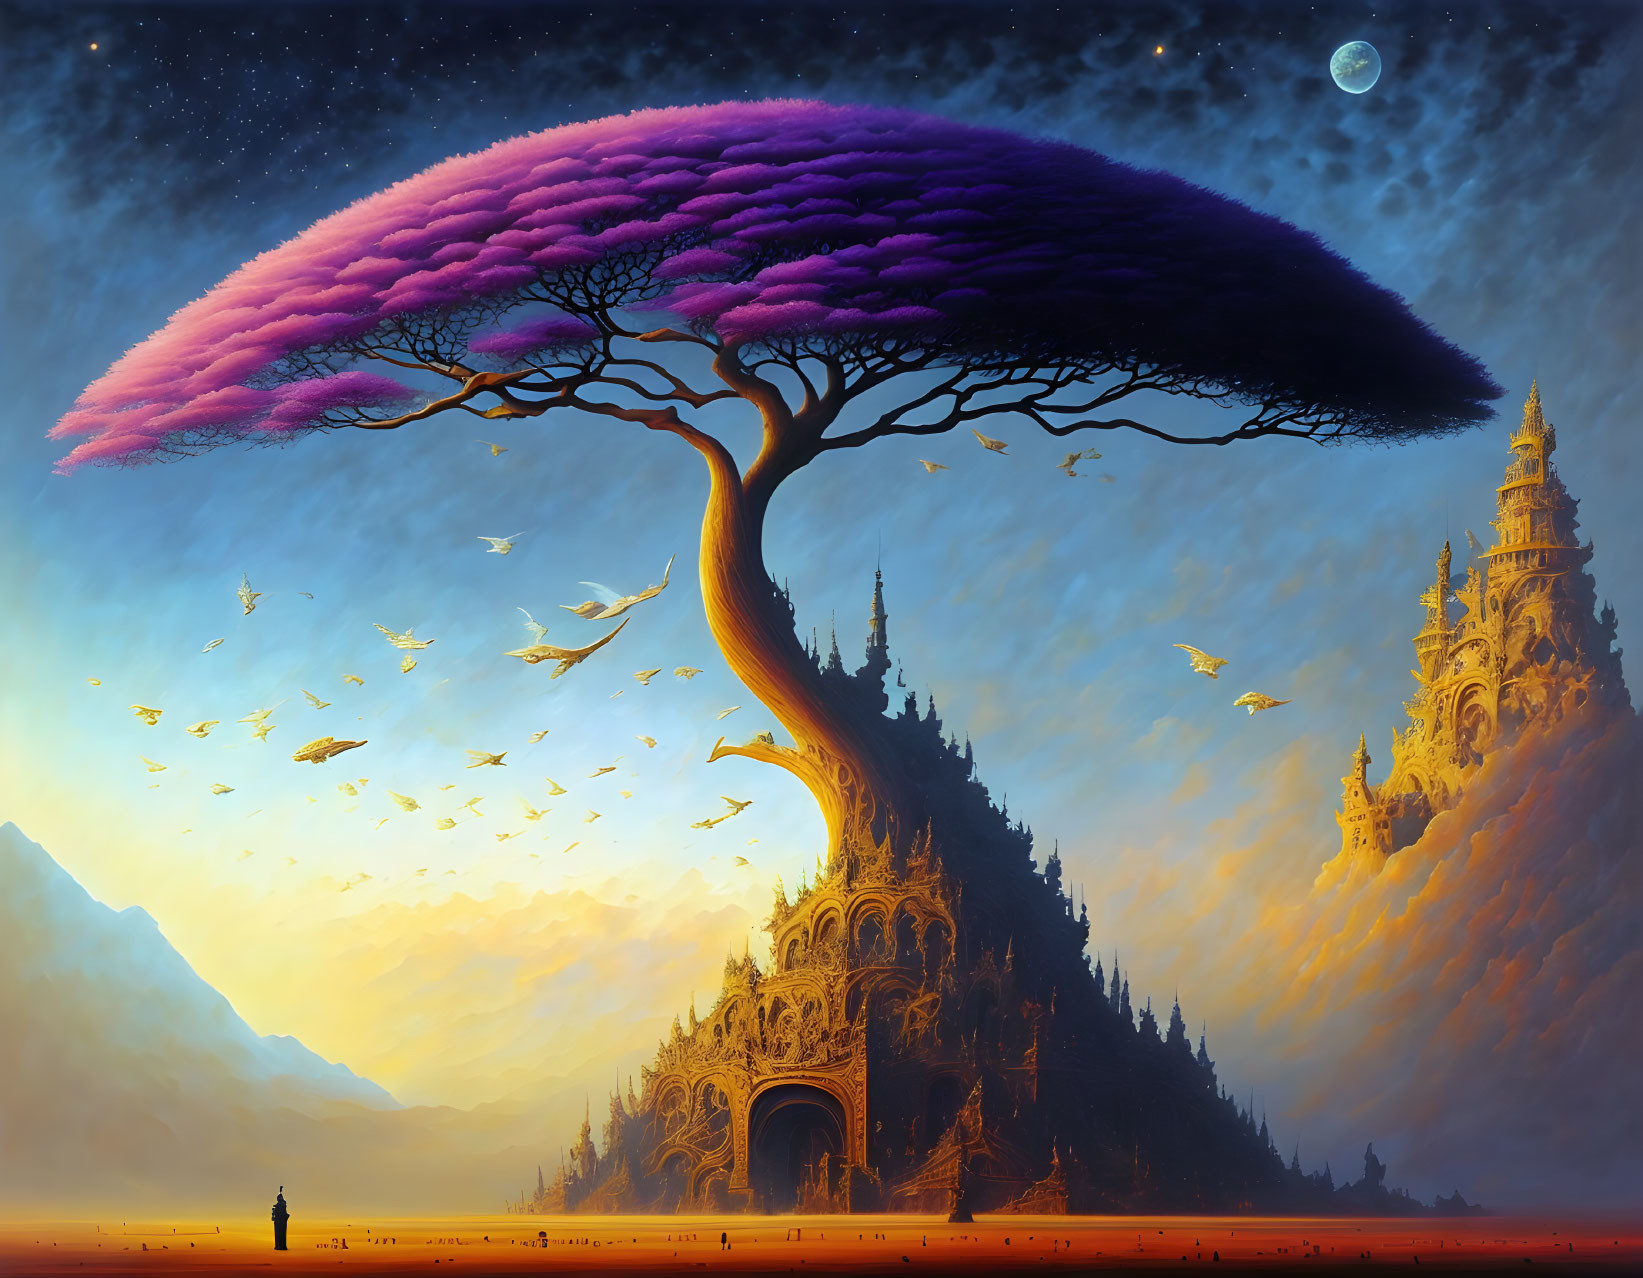 Surreal landscape with massive purple tree, carved tower, birds, figure, and distant planet.